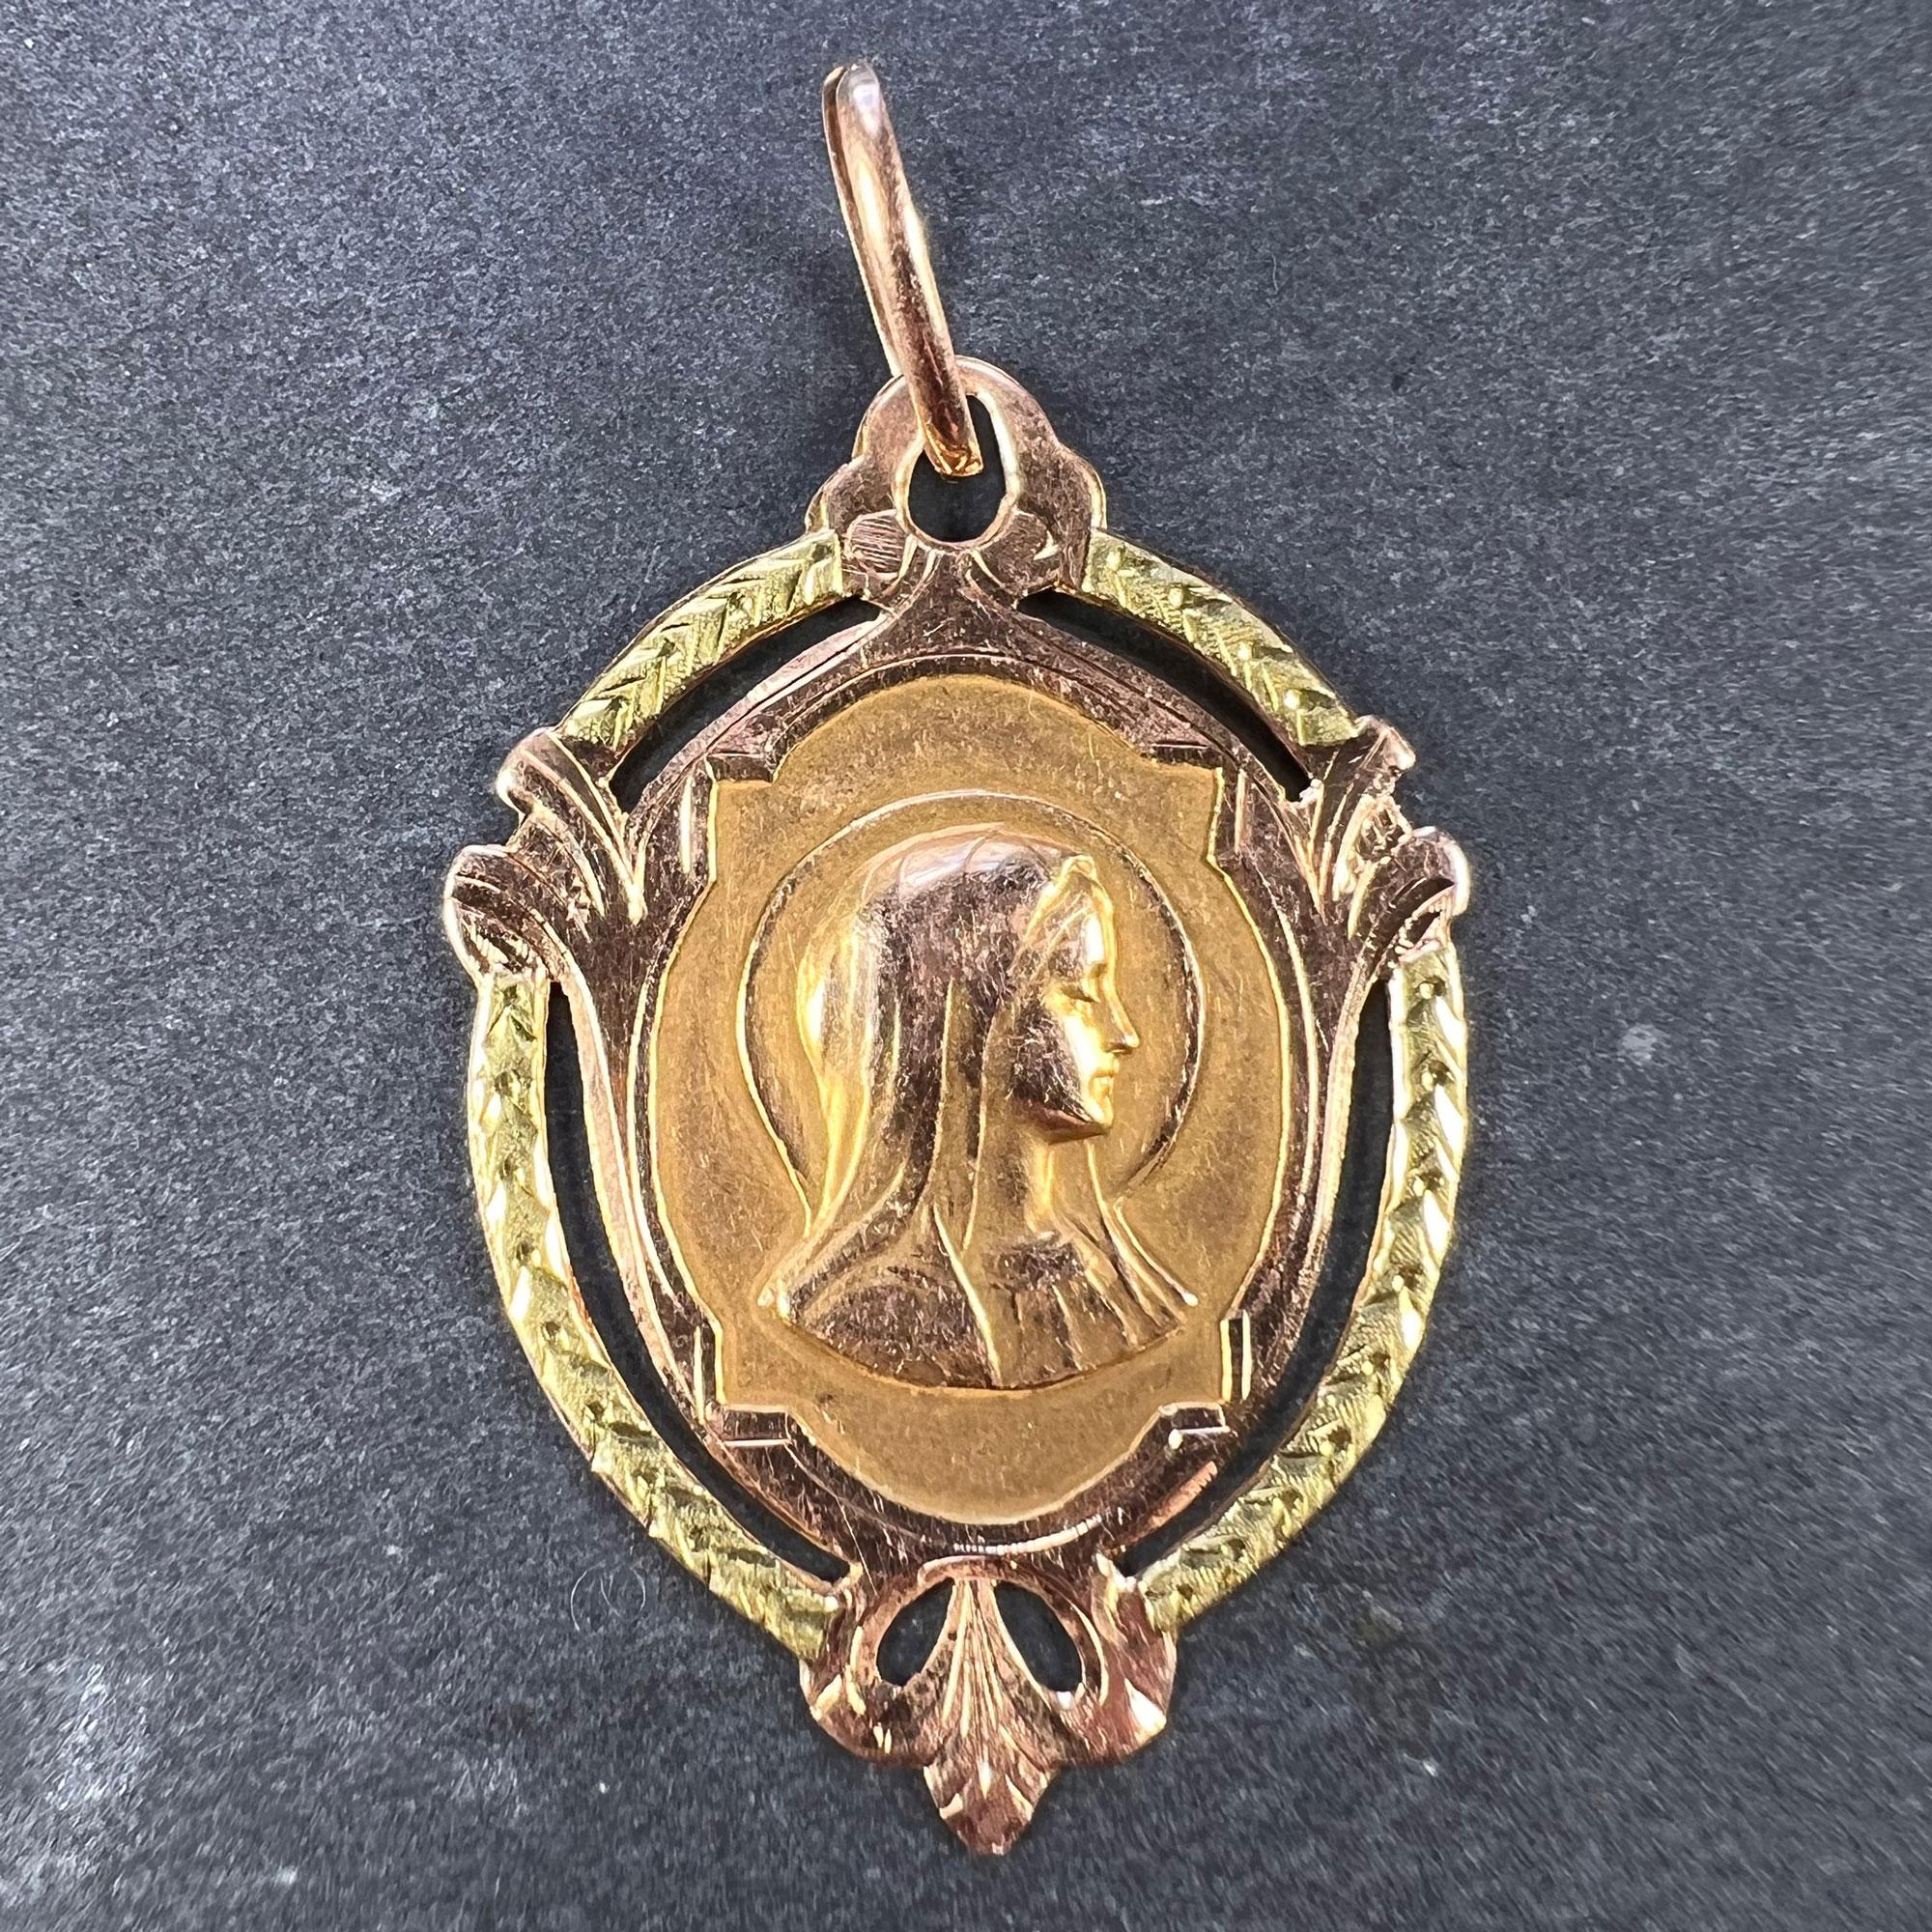 A French 18 karat (18K) rose gold charm pendant designed as a shield-shaped medal depicting the Virgin Mary in profile within a yellow gold wreath frame. Engraved to the reverse with the monogram SS and dated 27 Mai 1923. Stamped with the eagle's